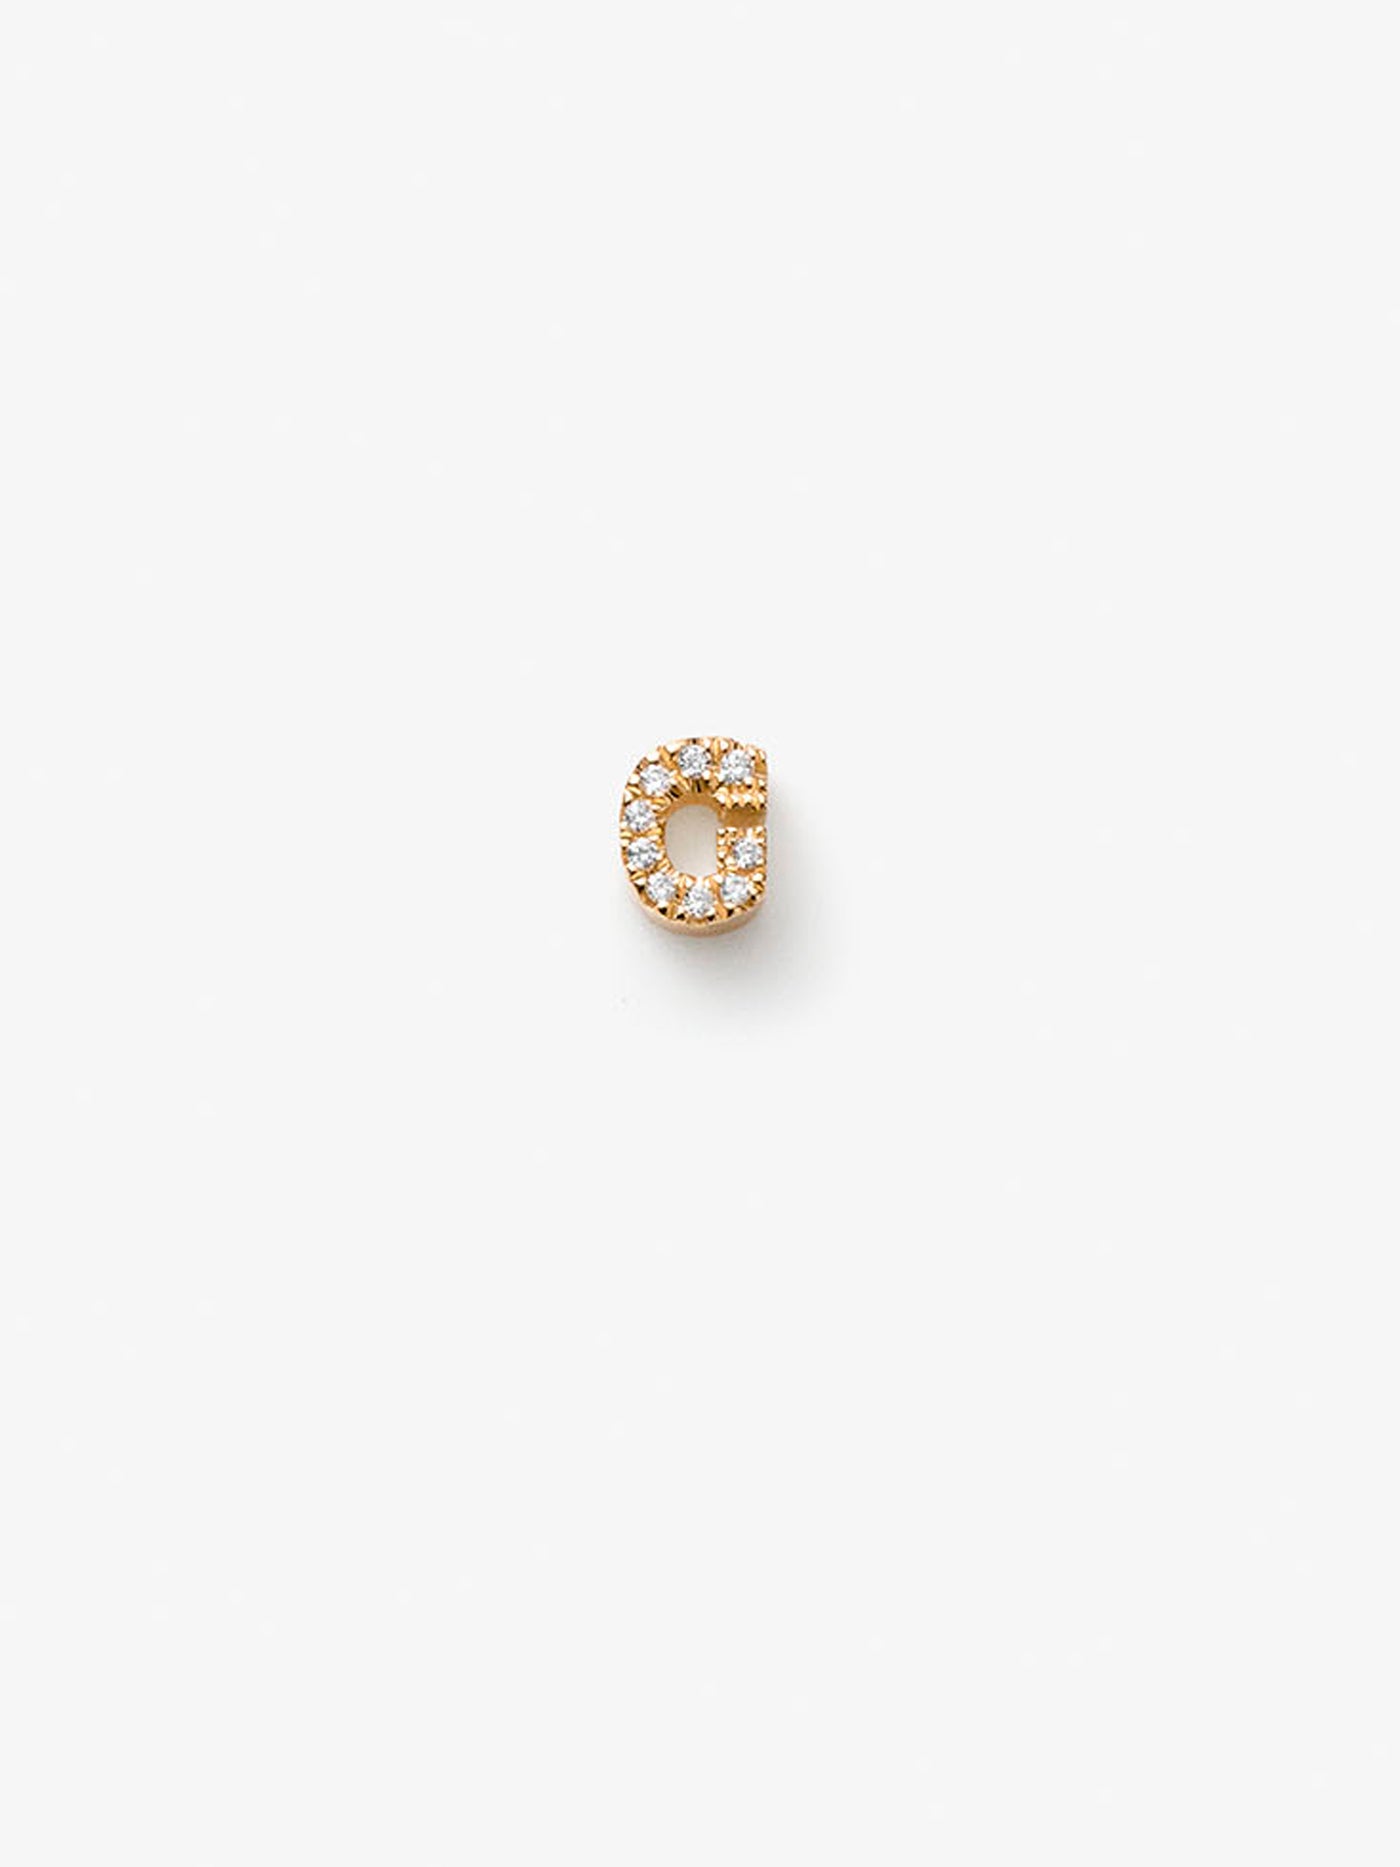 Letter G in Diamonds and 18k Gold